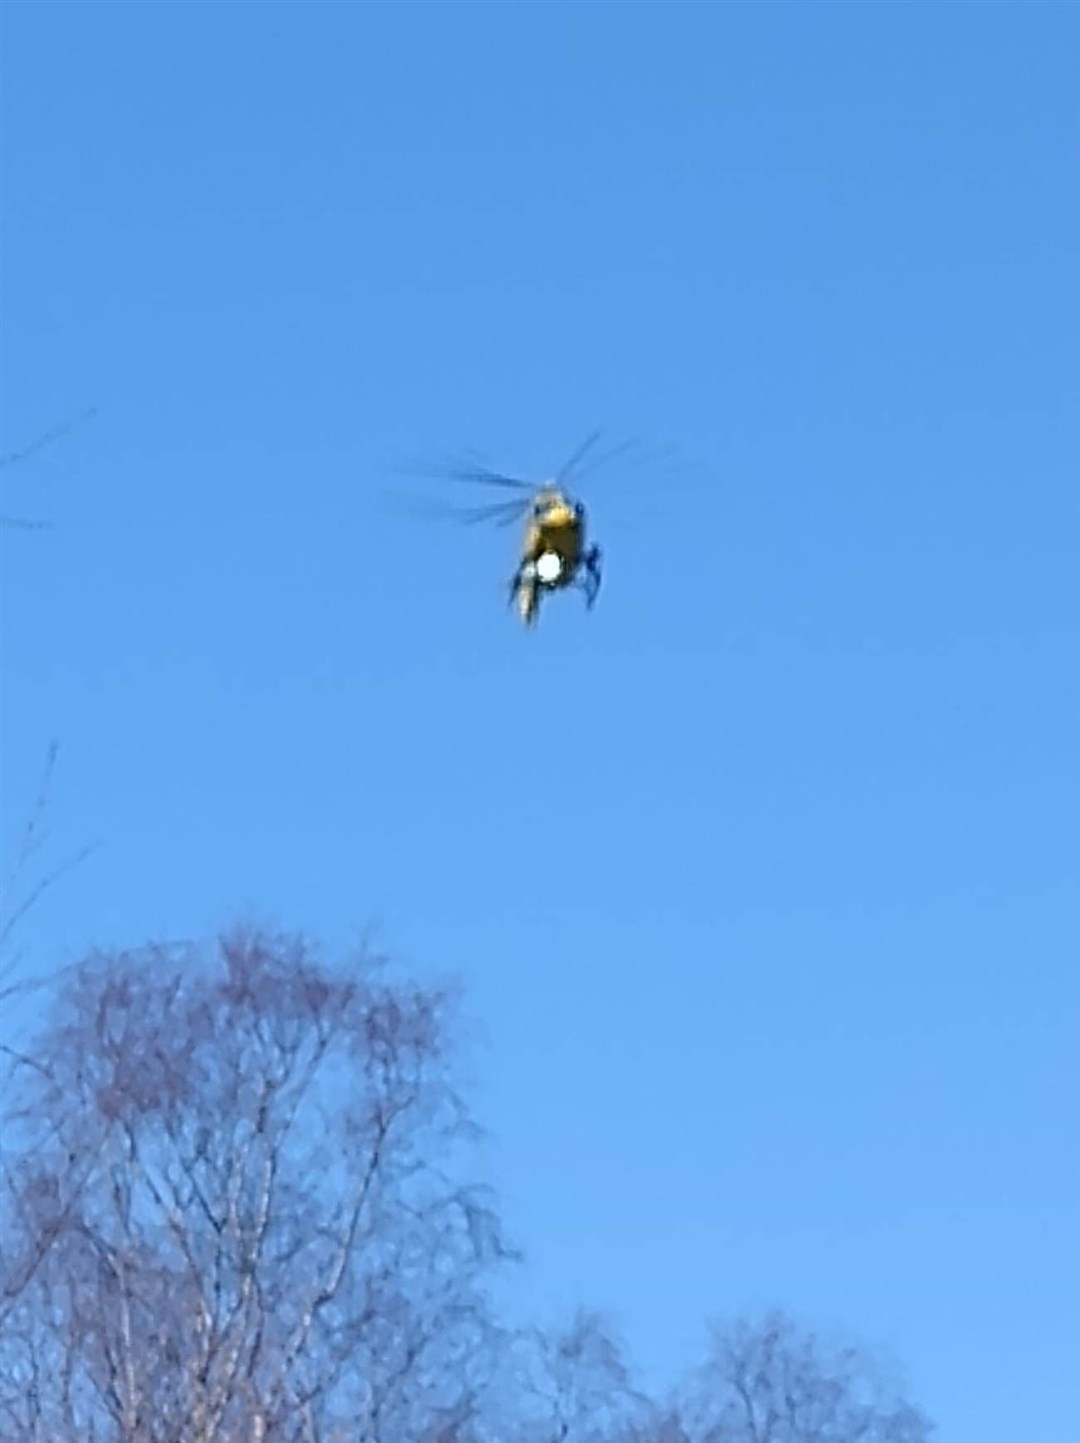 Air ambulance arriving this morning at the scene of A9 crash